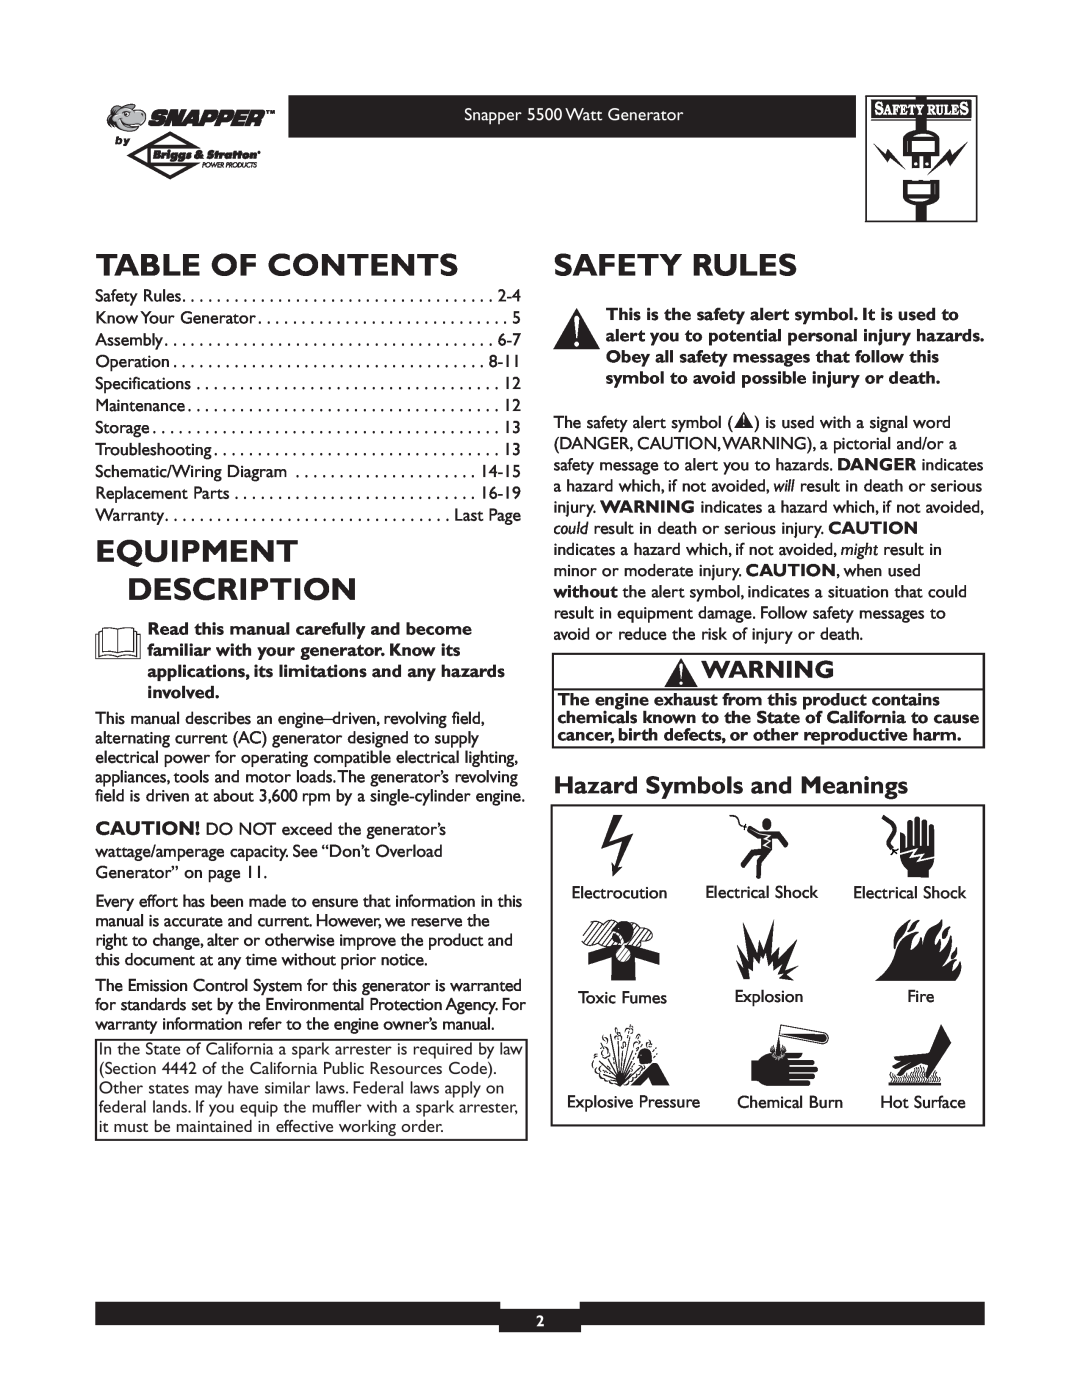 Snapper 1668-0 owner manual Table Of Contents, Equipment Description, Safety Rules, Hazard Symbols and Meanings 